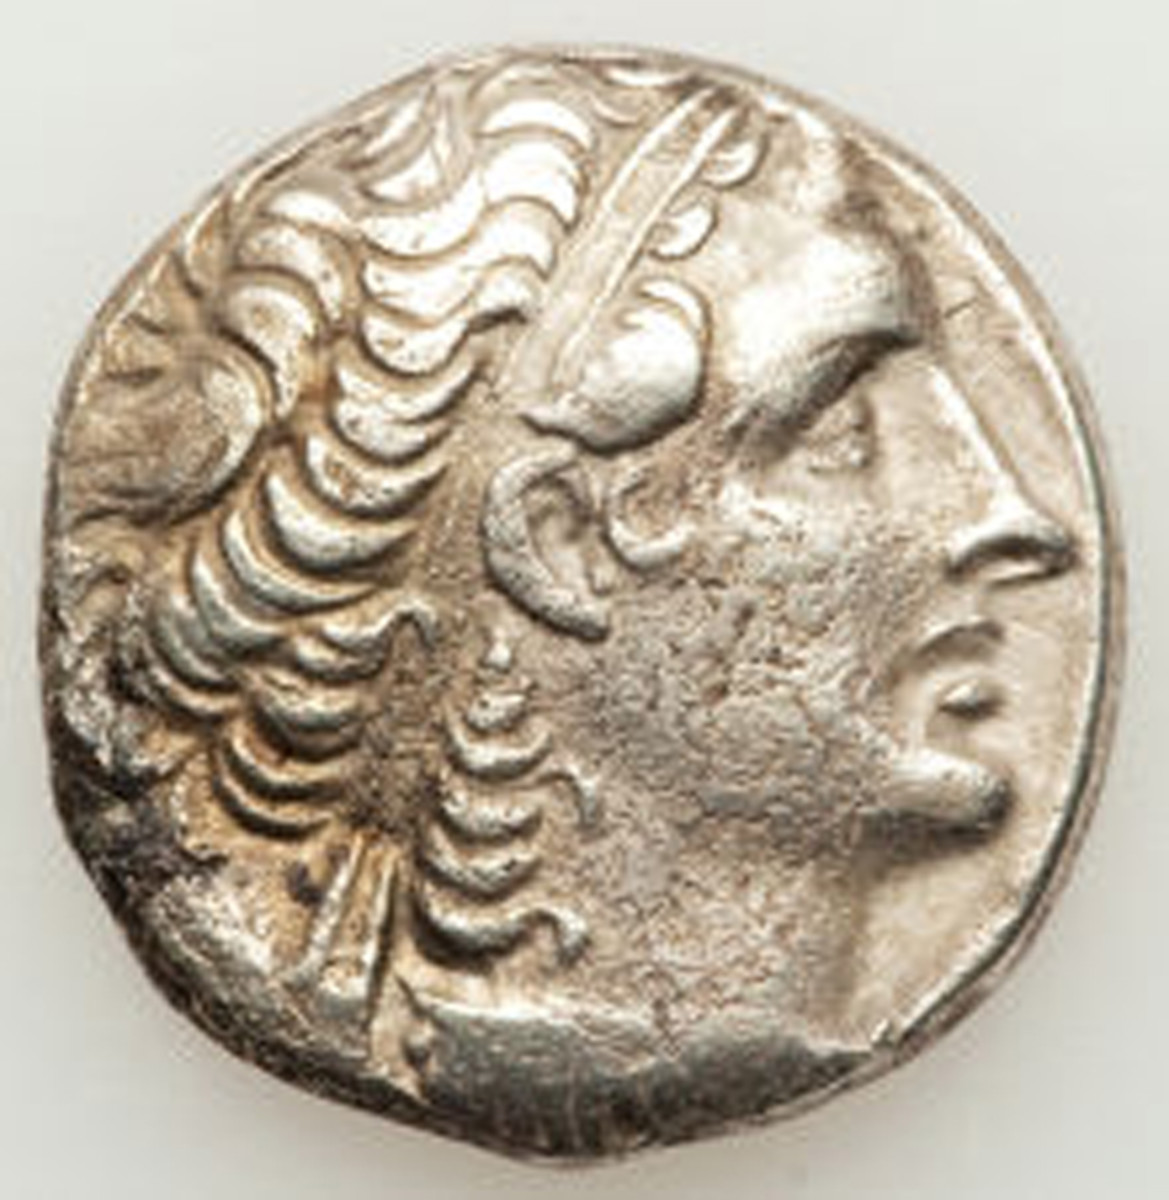 An Ptolemy XII Neos Dionysus (55-51 BC) AR tetradrachm that would fall under the agreement's scope.